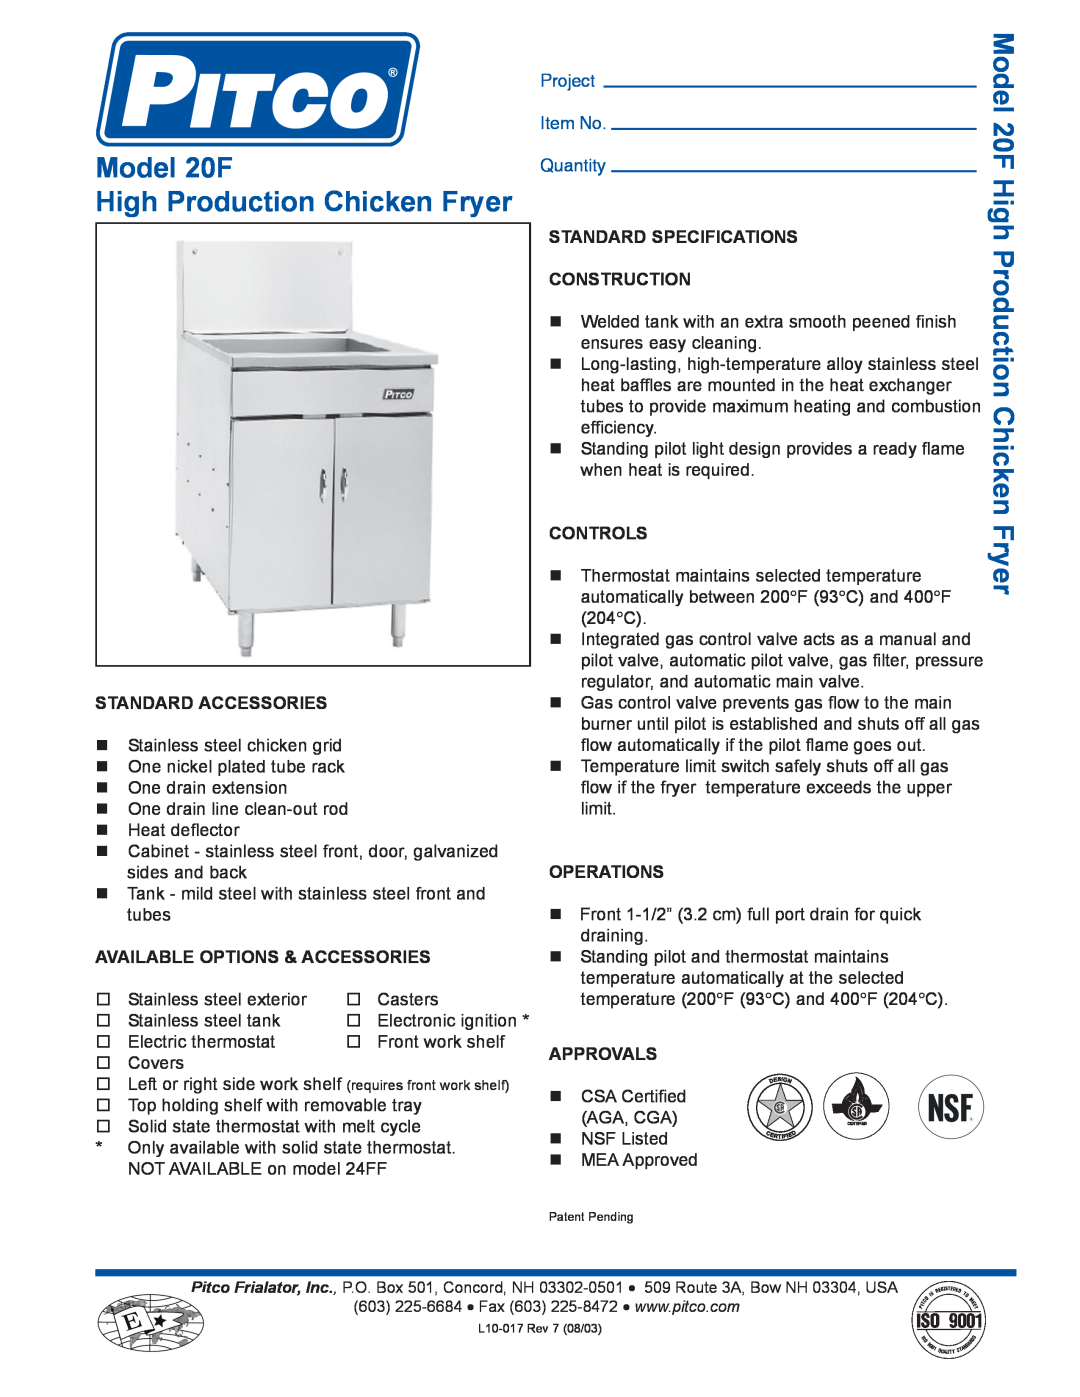 Pitco Frialator specifications Model 20F High Production Chicken Fryer, Standard Accessories, Project, Item No 